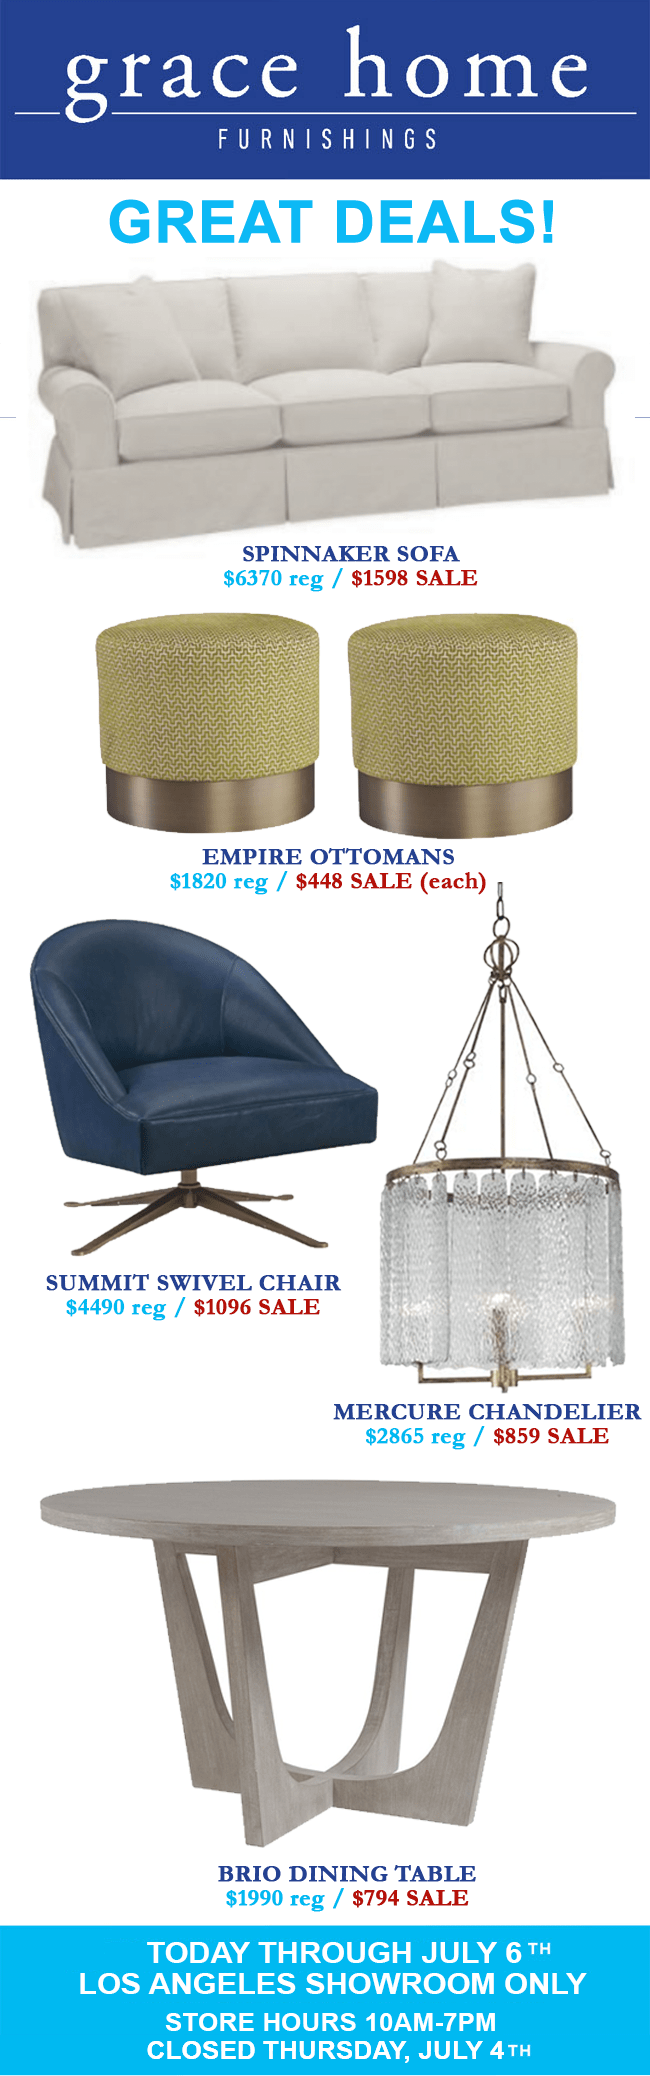 Great deals during final days of Grace Home Furnishings Annual Storewide Clearance Sale